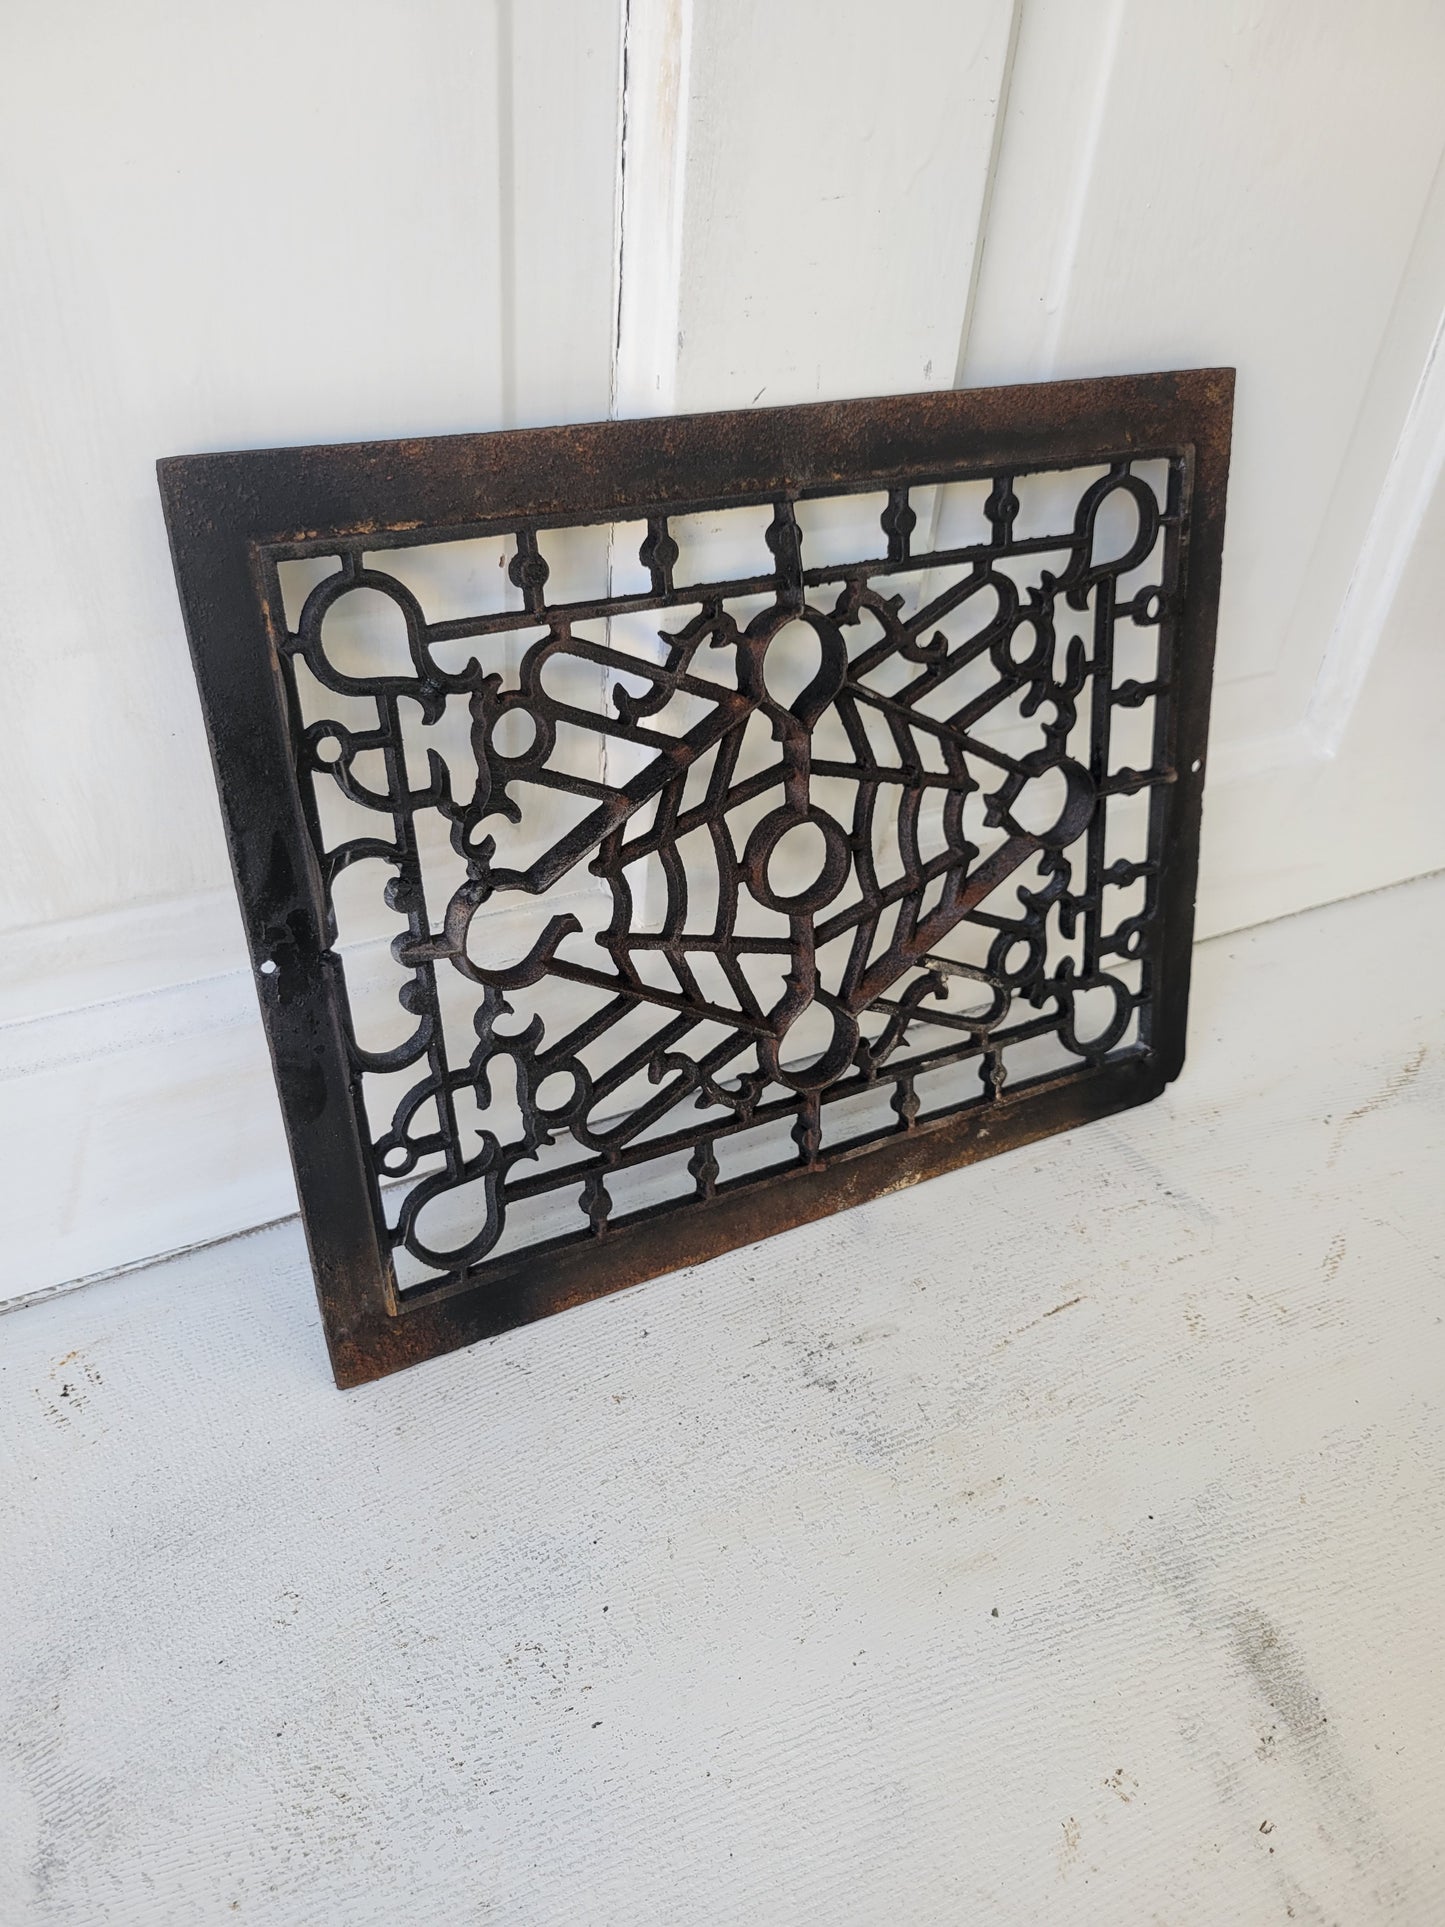 Antique 11 x 14 Fancy Cast Iron Vent Cover, Floor or Wall Mount Heat Register Grate #061203